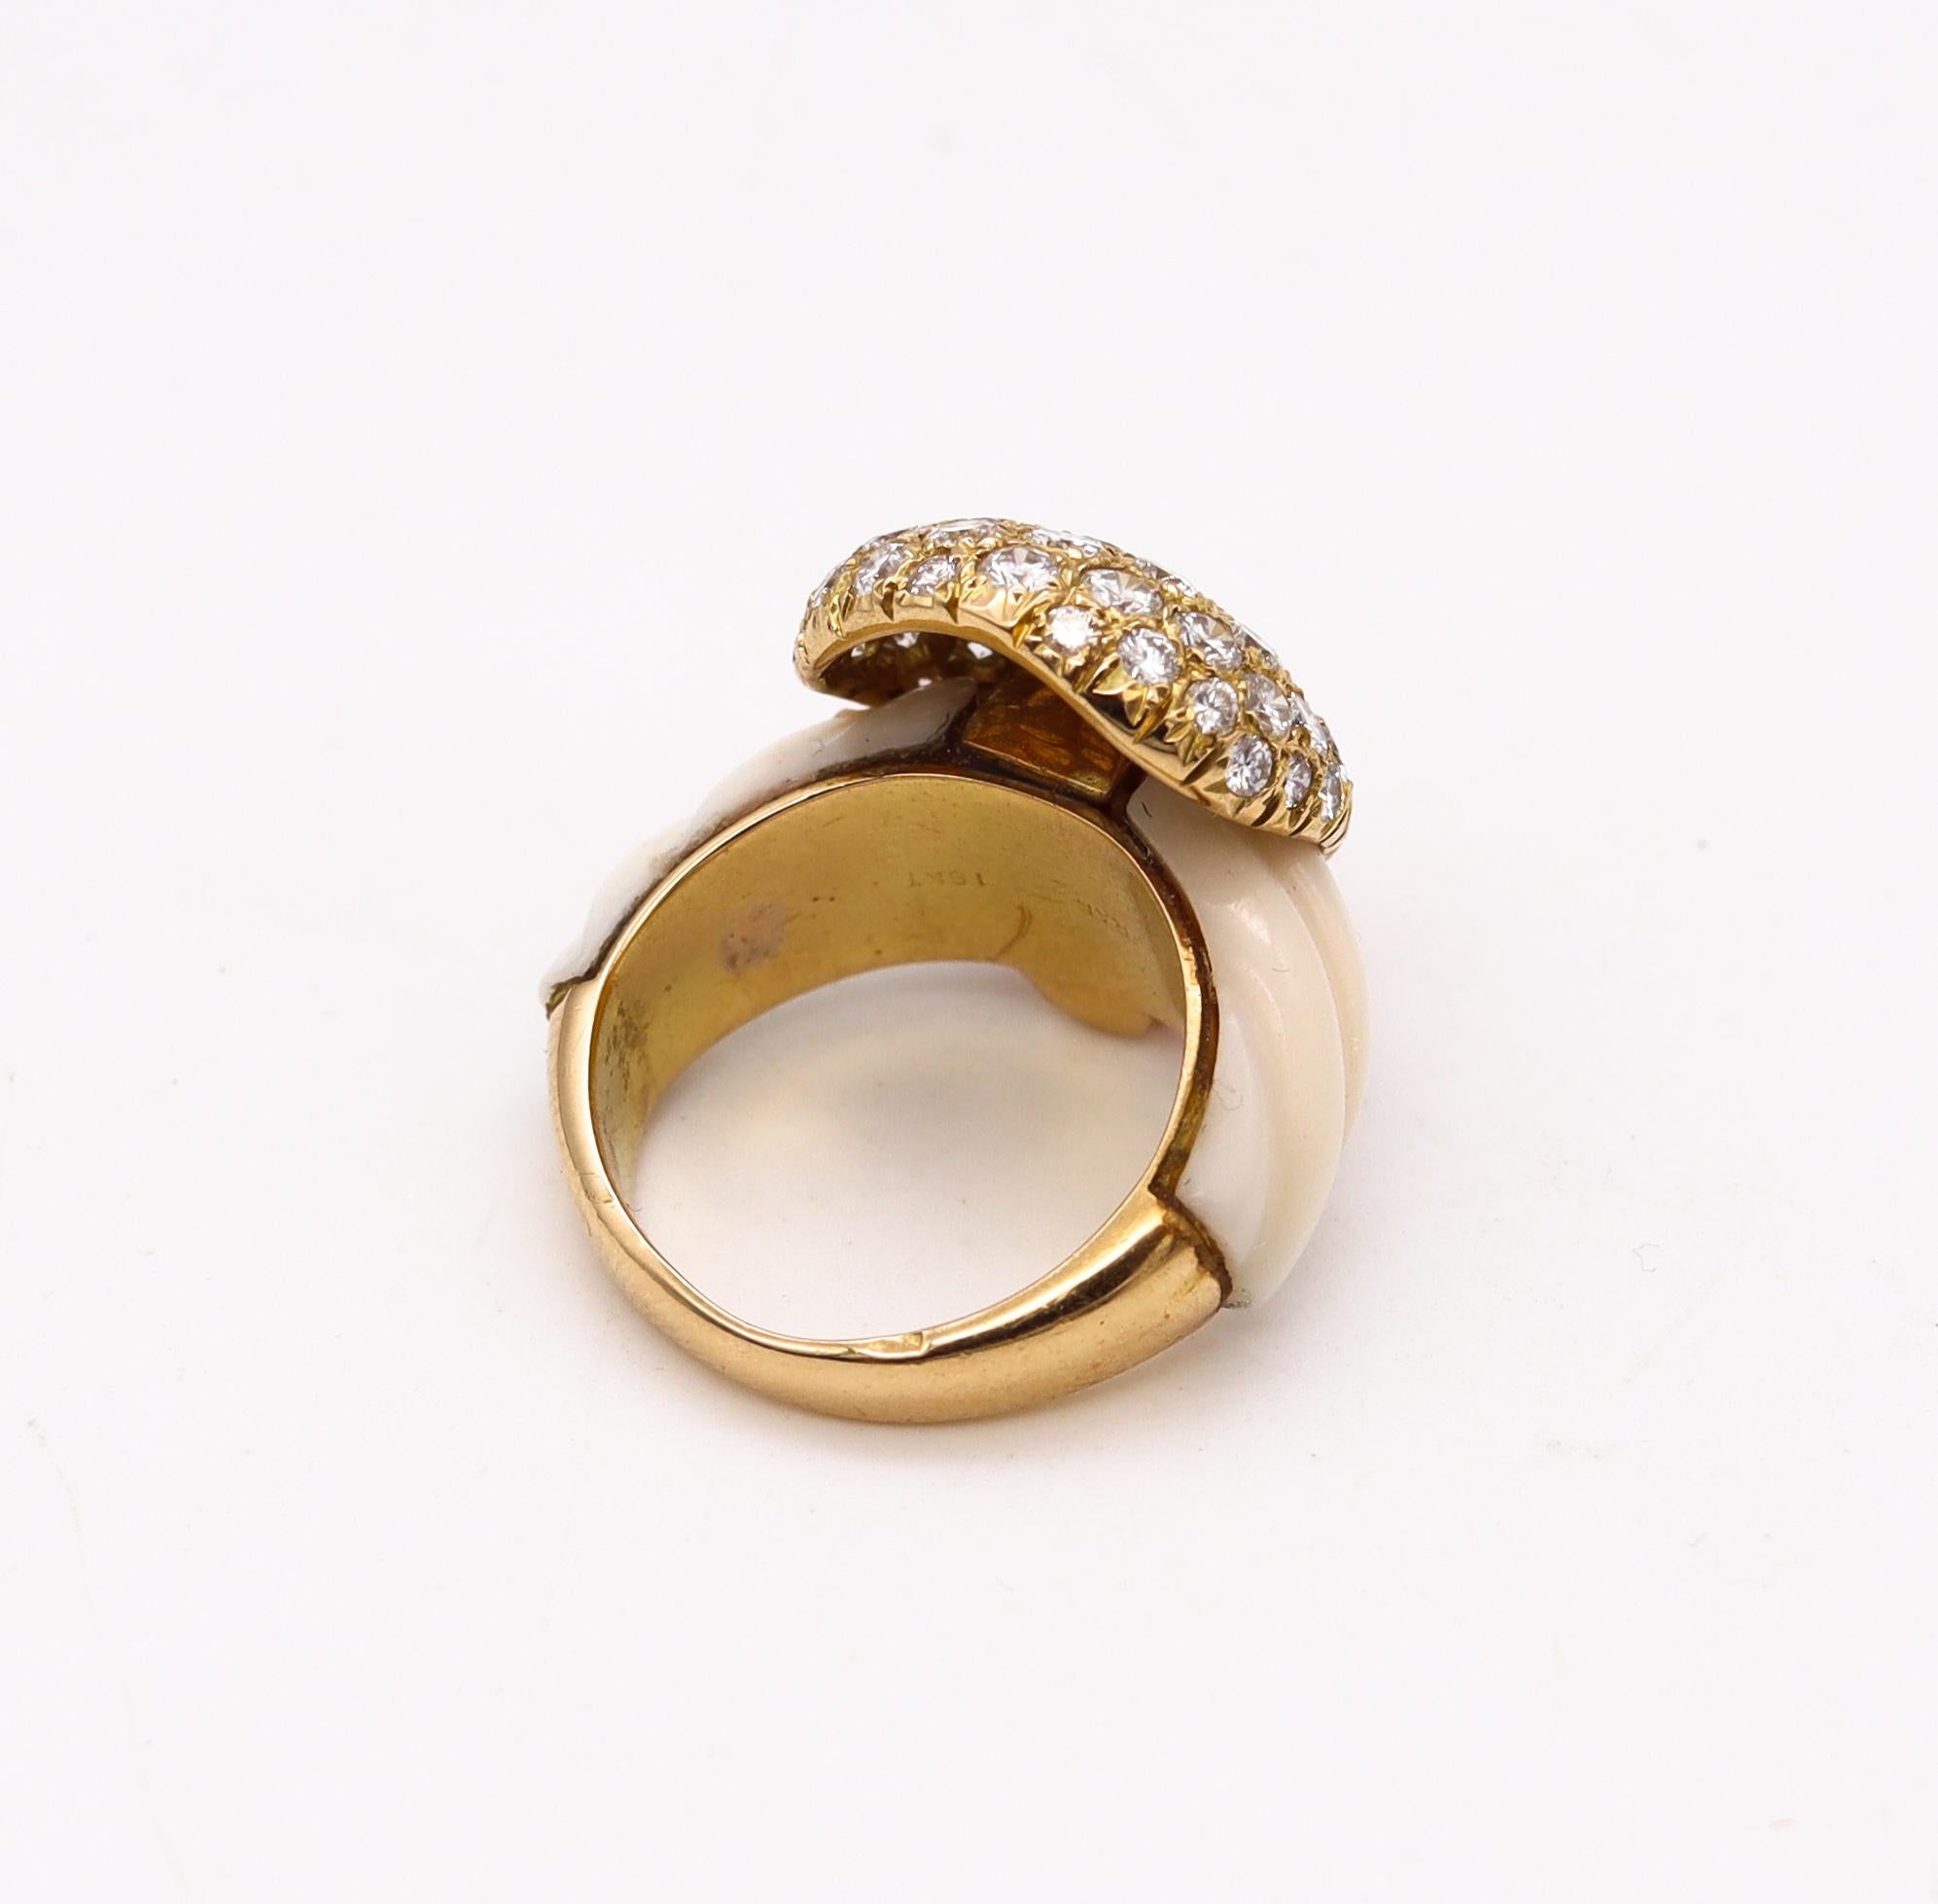 Modernist French 1970 Paris Cocktail Ring in 18kt Yellow Gold 2.52 Cts VVS Diamonds Coral